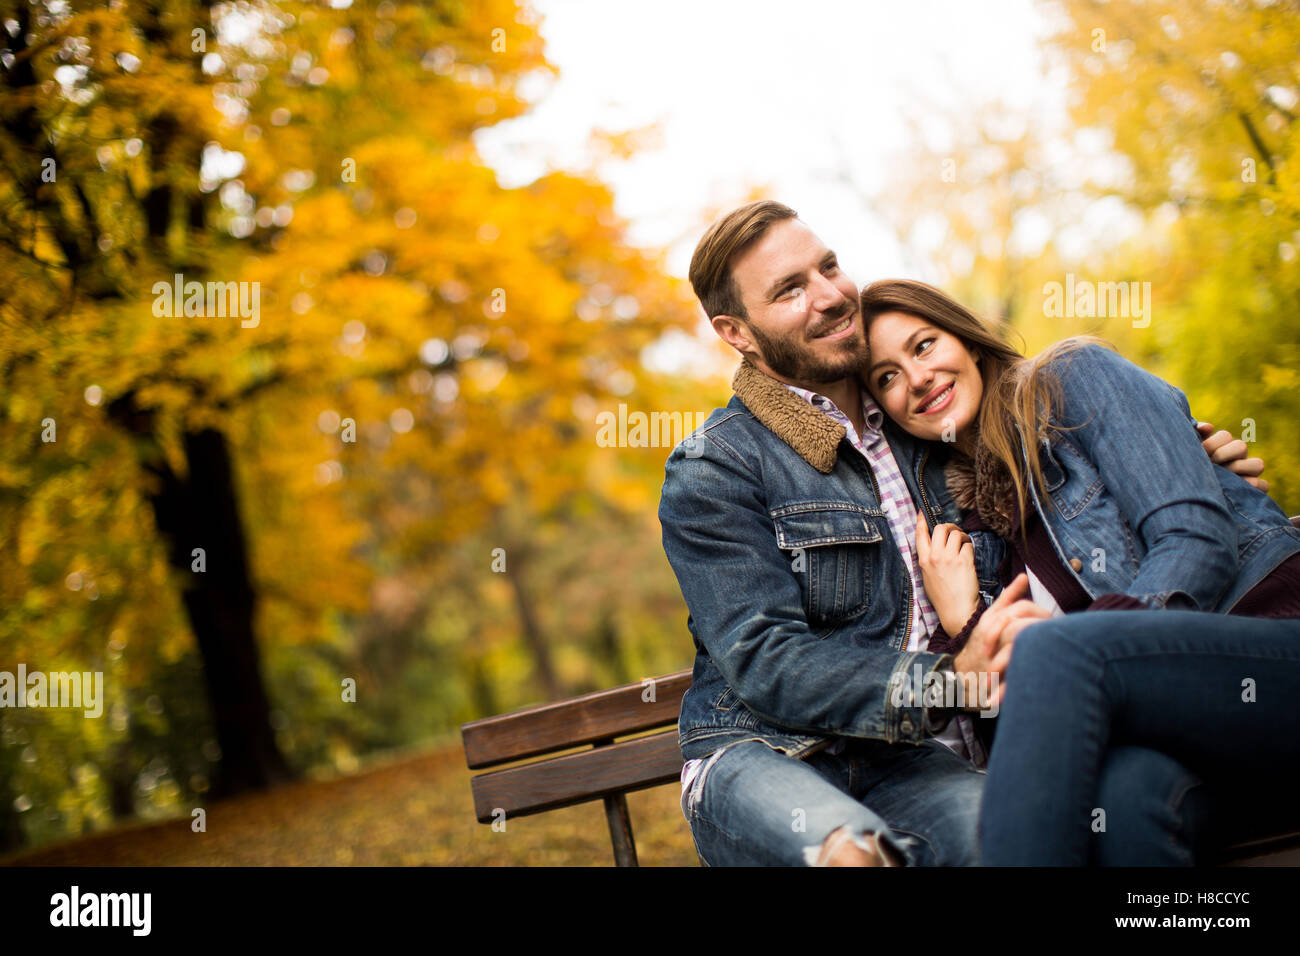 Loving and romantic couple on a bench in the autumn park Stock Photo